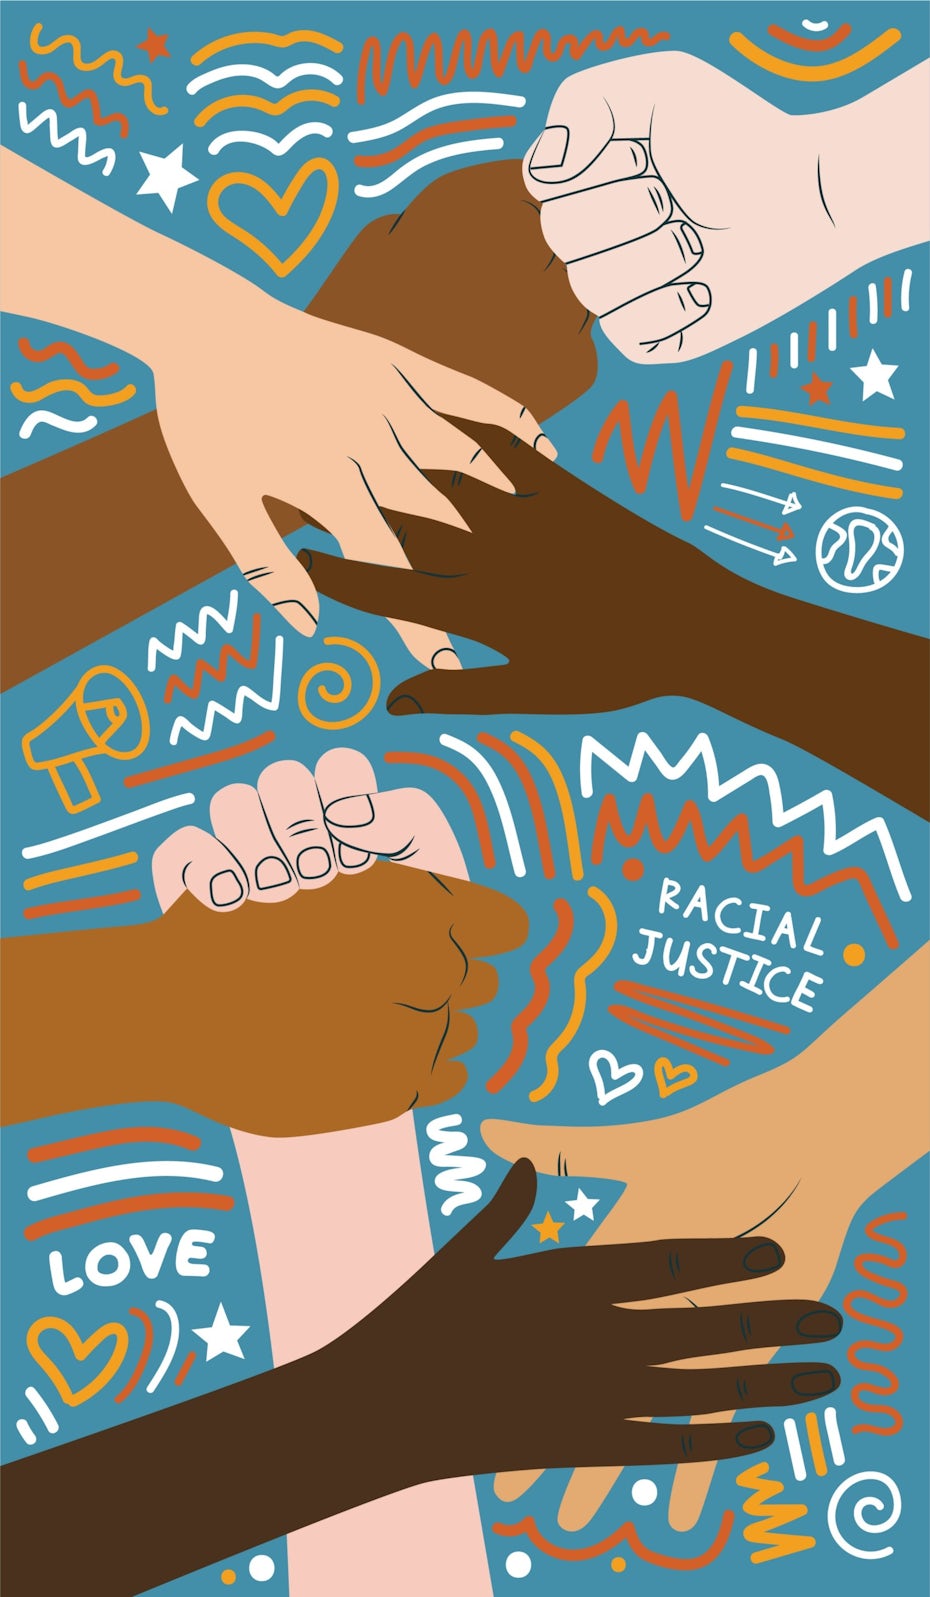 Illustrated poster design for racial justice